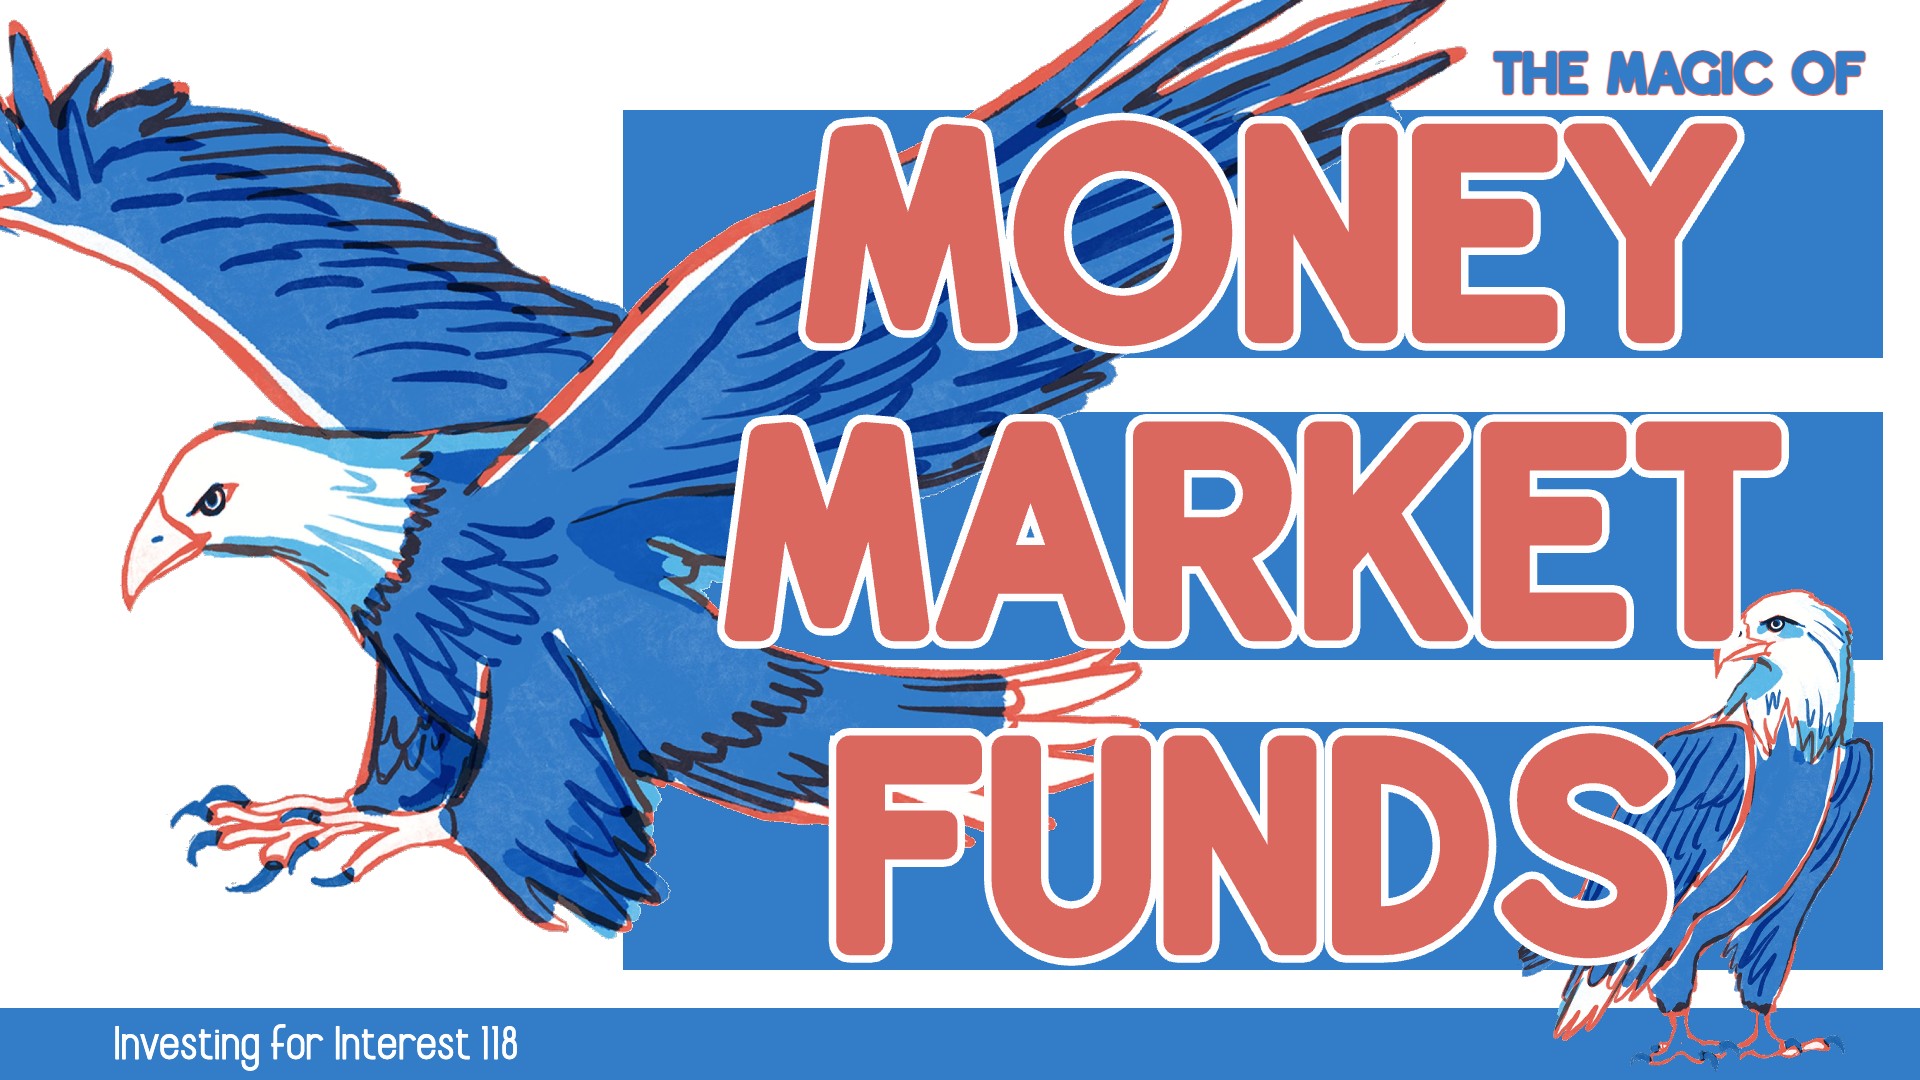 Investing for Interest 118: The Magic of Money Market Funds